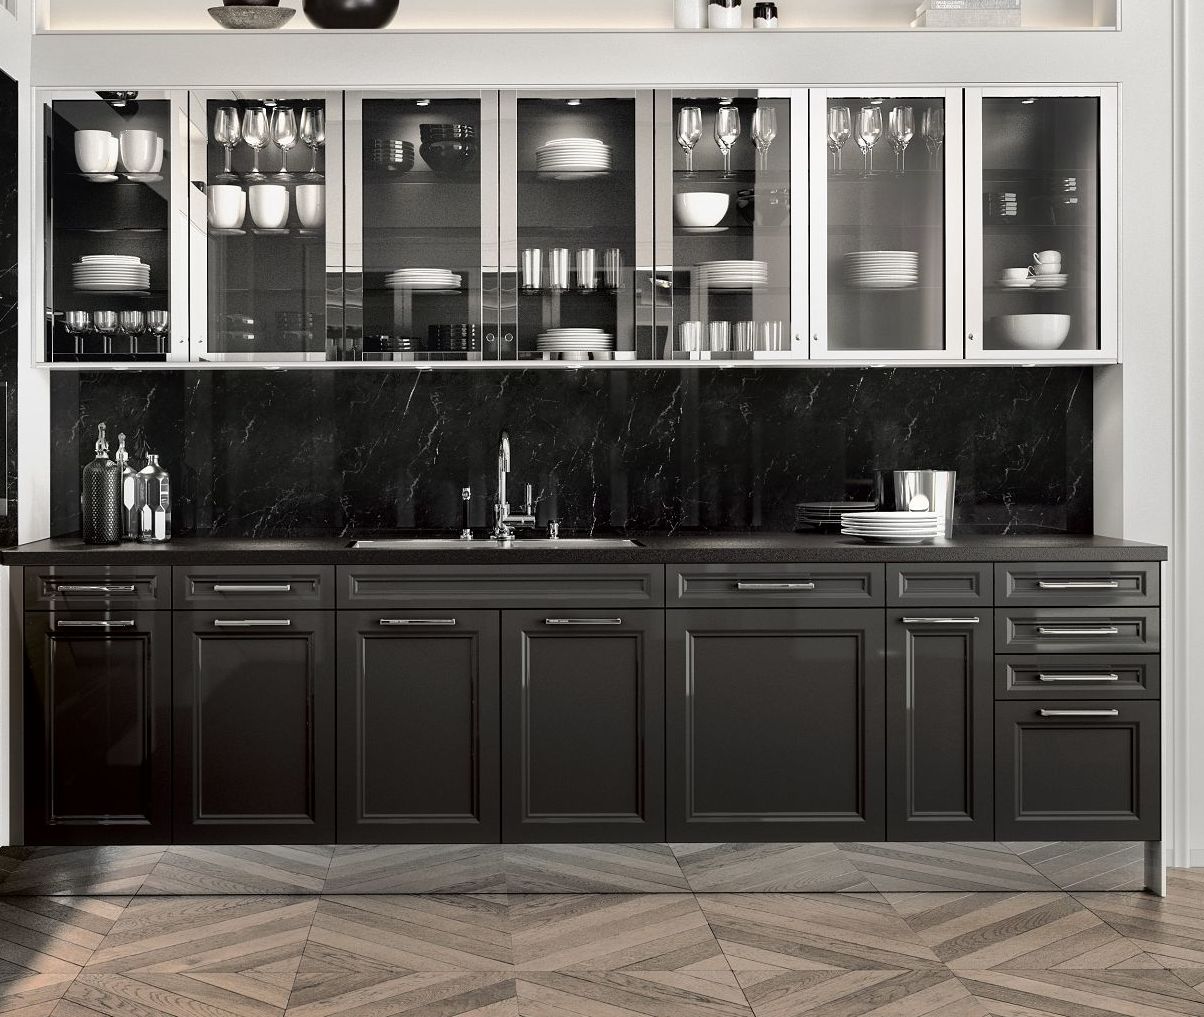 SieMatic Classic BeauxArts SE base cabinets in graphite grey and glass wall cabinets in polished nickel